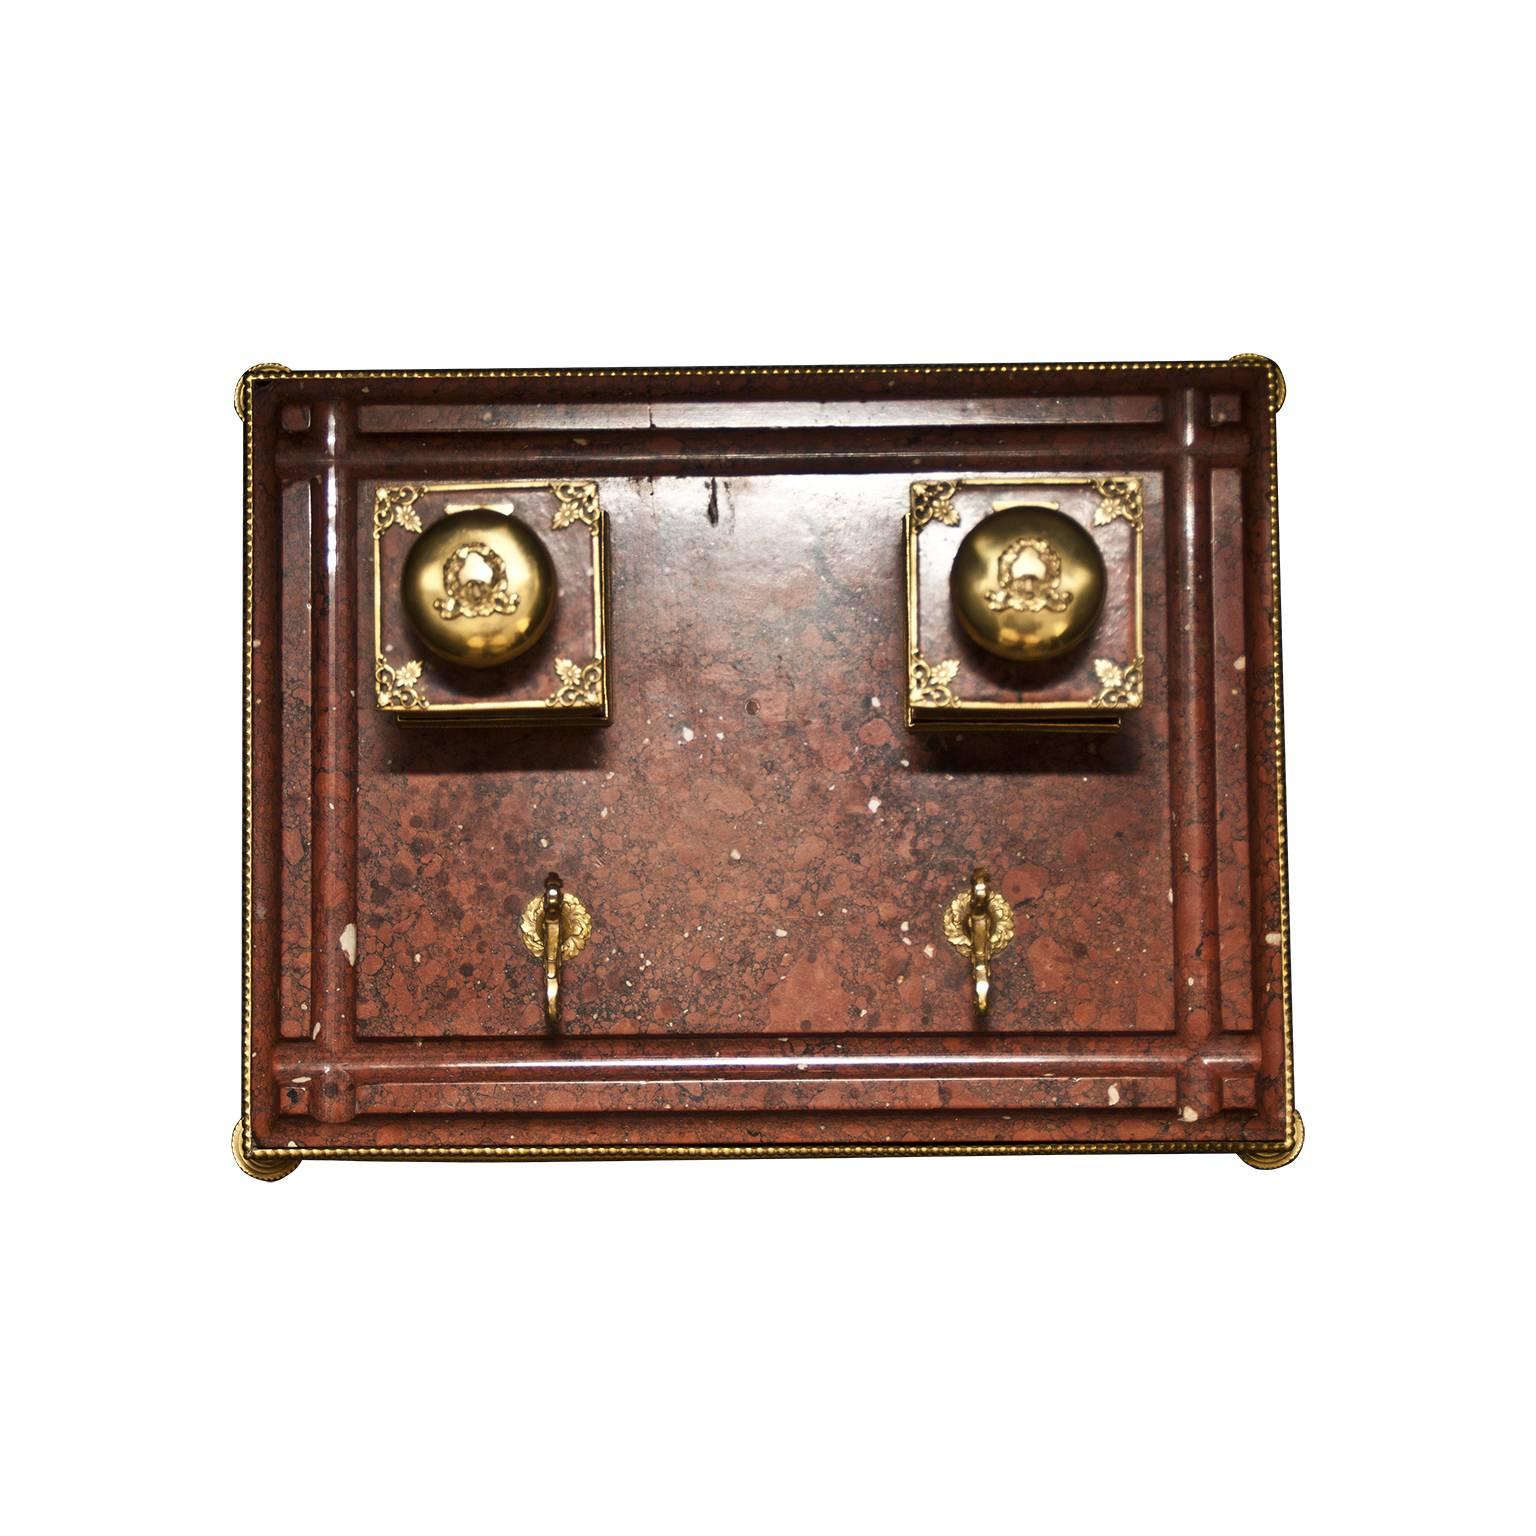 A beautiful double inkwell mounted on a red marble from Verona base, resting on four gilt bronze pad feet. 

This product is located and shipped from Italy.

This artwork is shipped from Italy. Under existing legislation, any artwork in Italy